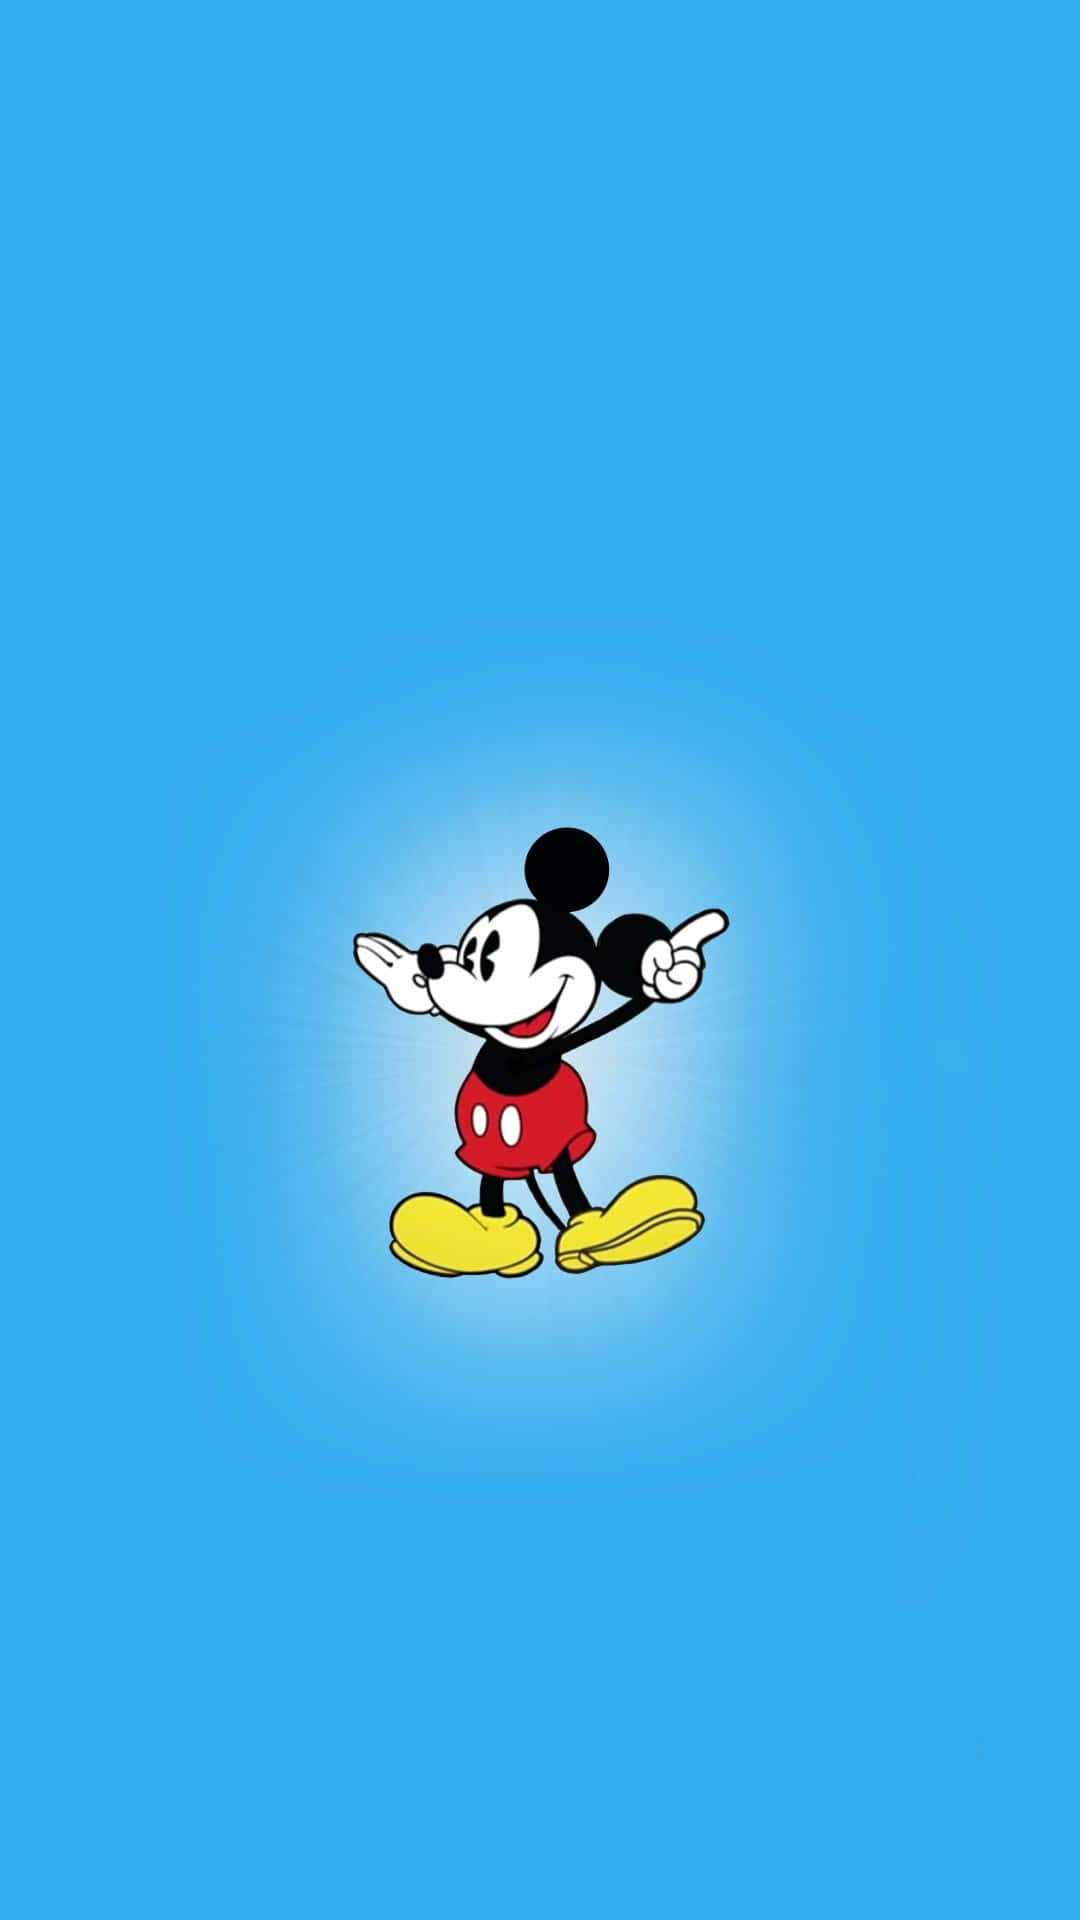 Mickey Mouse Ready To Make Some Cool New Adventures Wallpaper